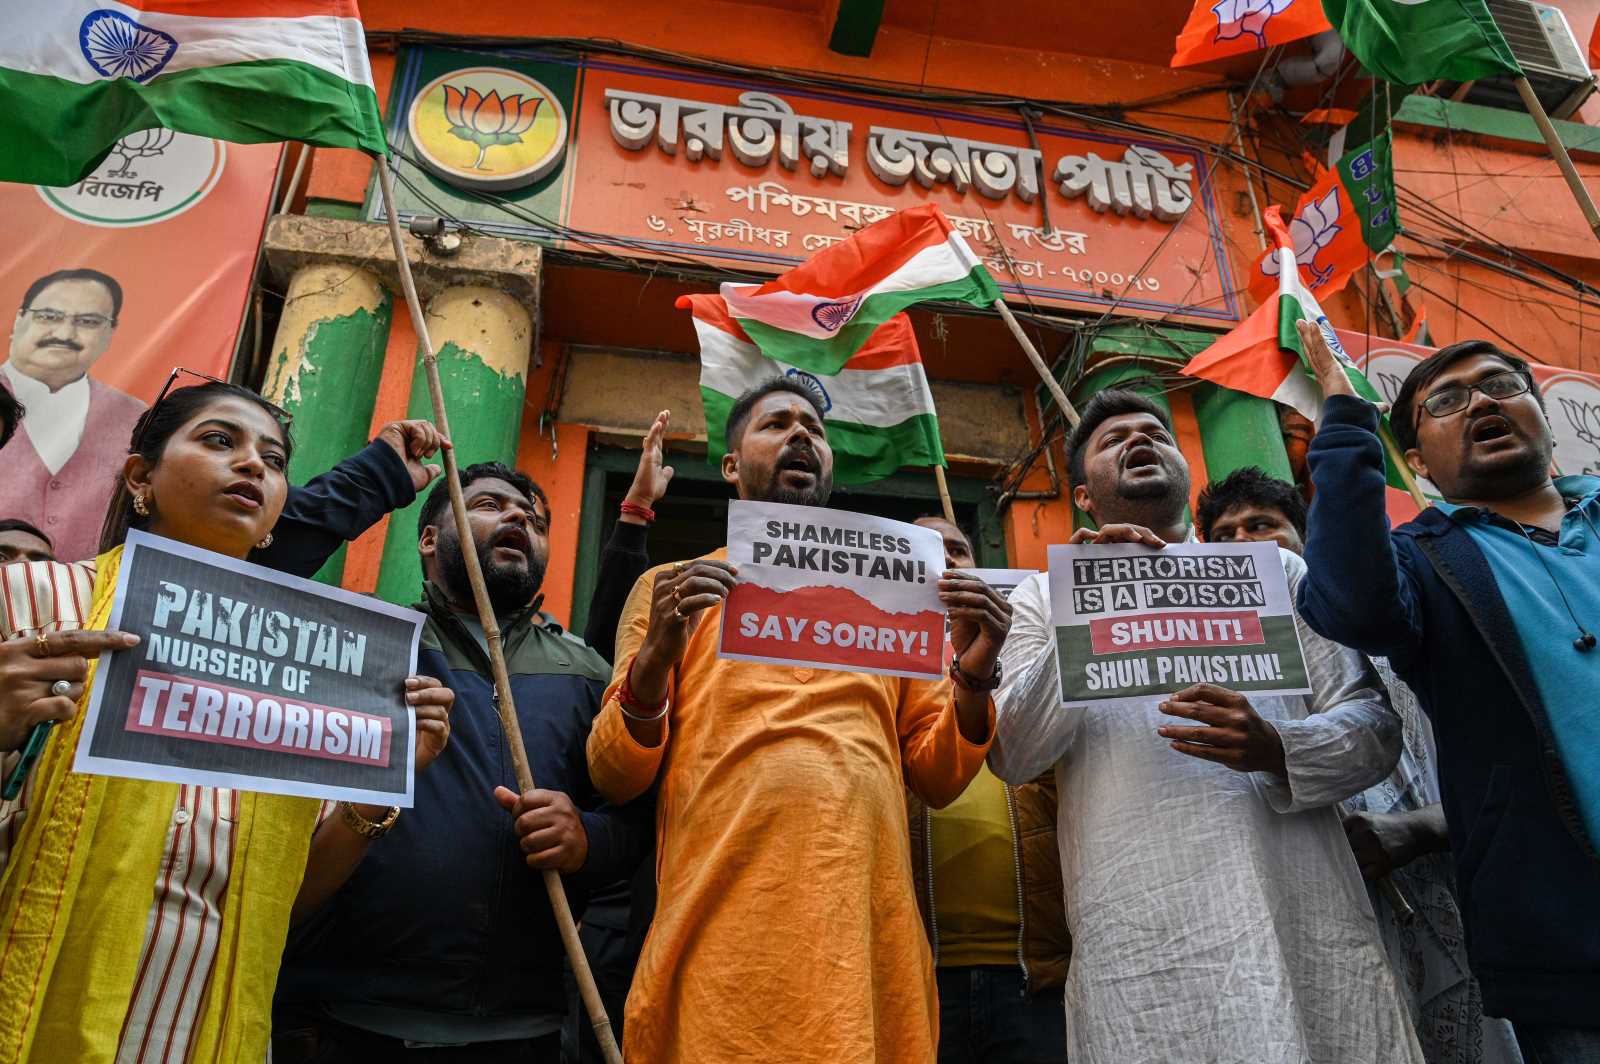 Activists of India's ruling BJP shout slogans during a demonstration to protest against Pakistan's Foreign Minister Bilawal Bhutto Zardari in Kolkata, December 2022.